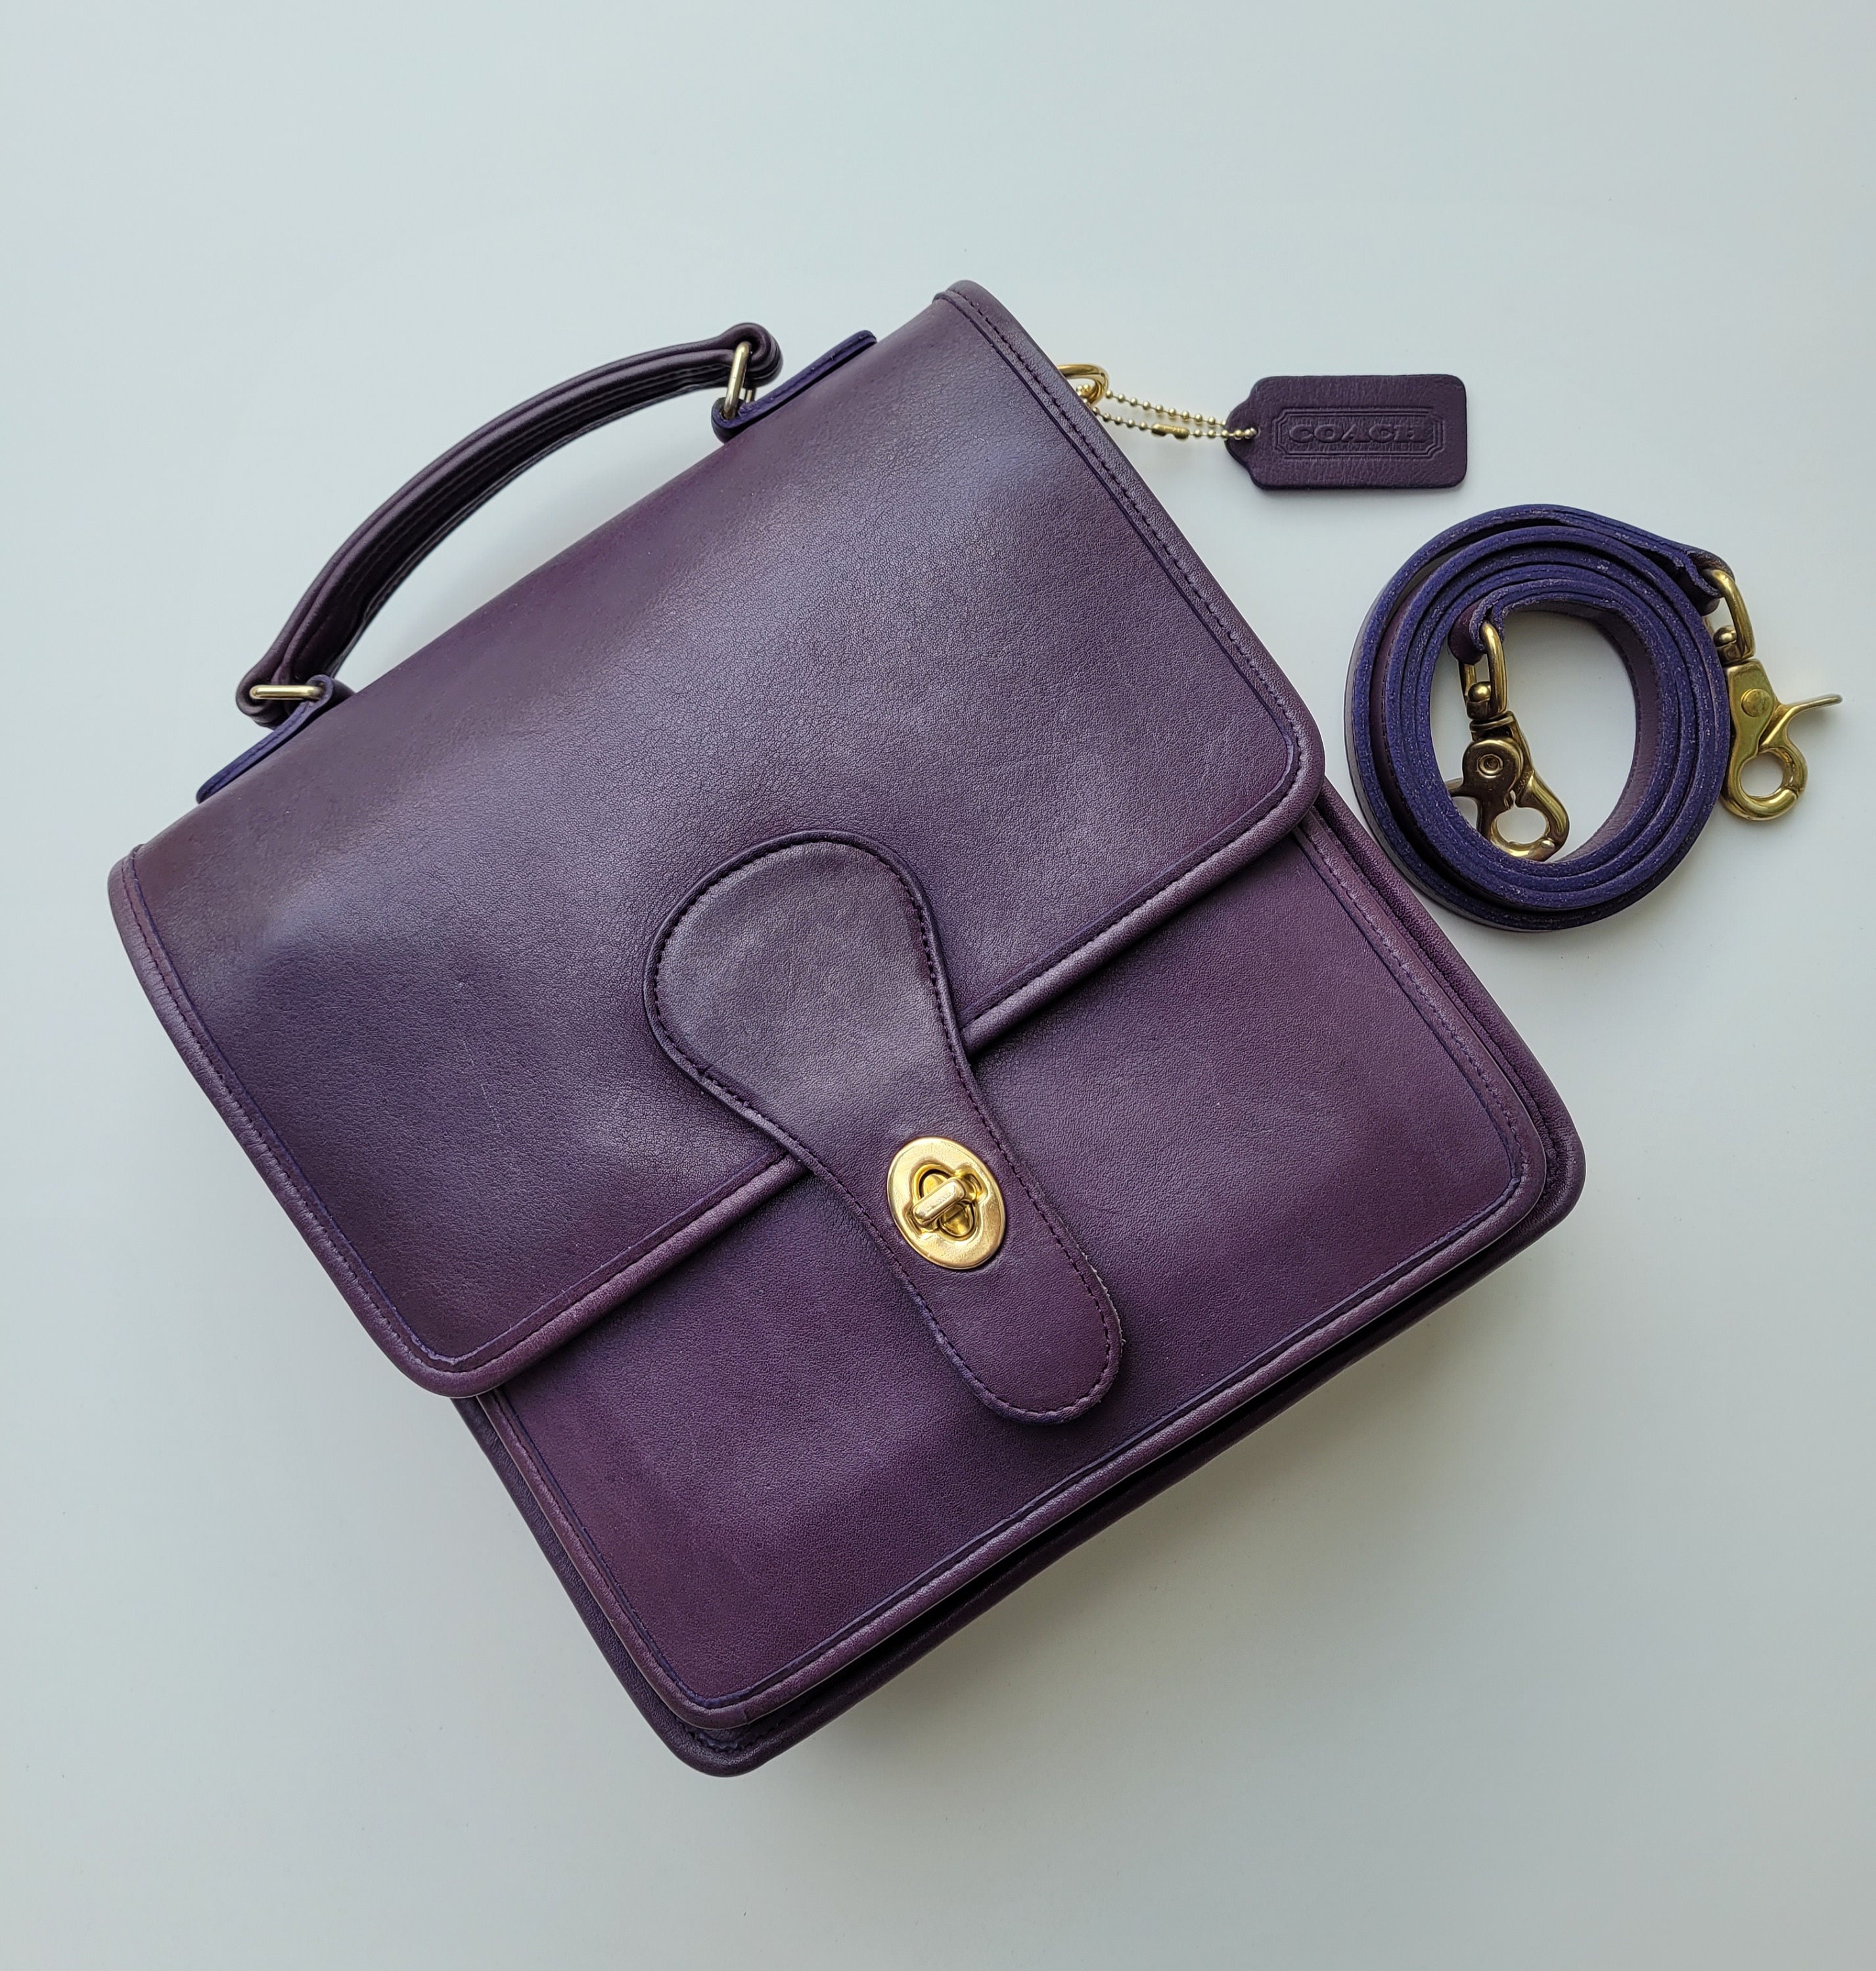 Coach purse purple with strap - Bags and purses